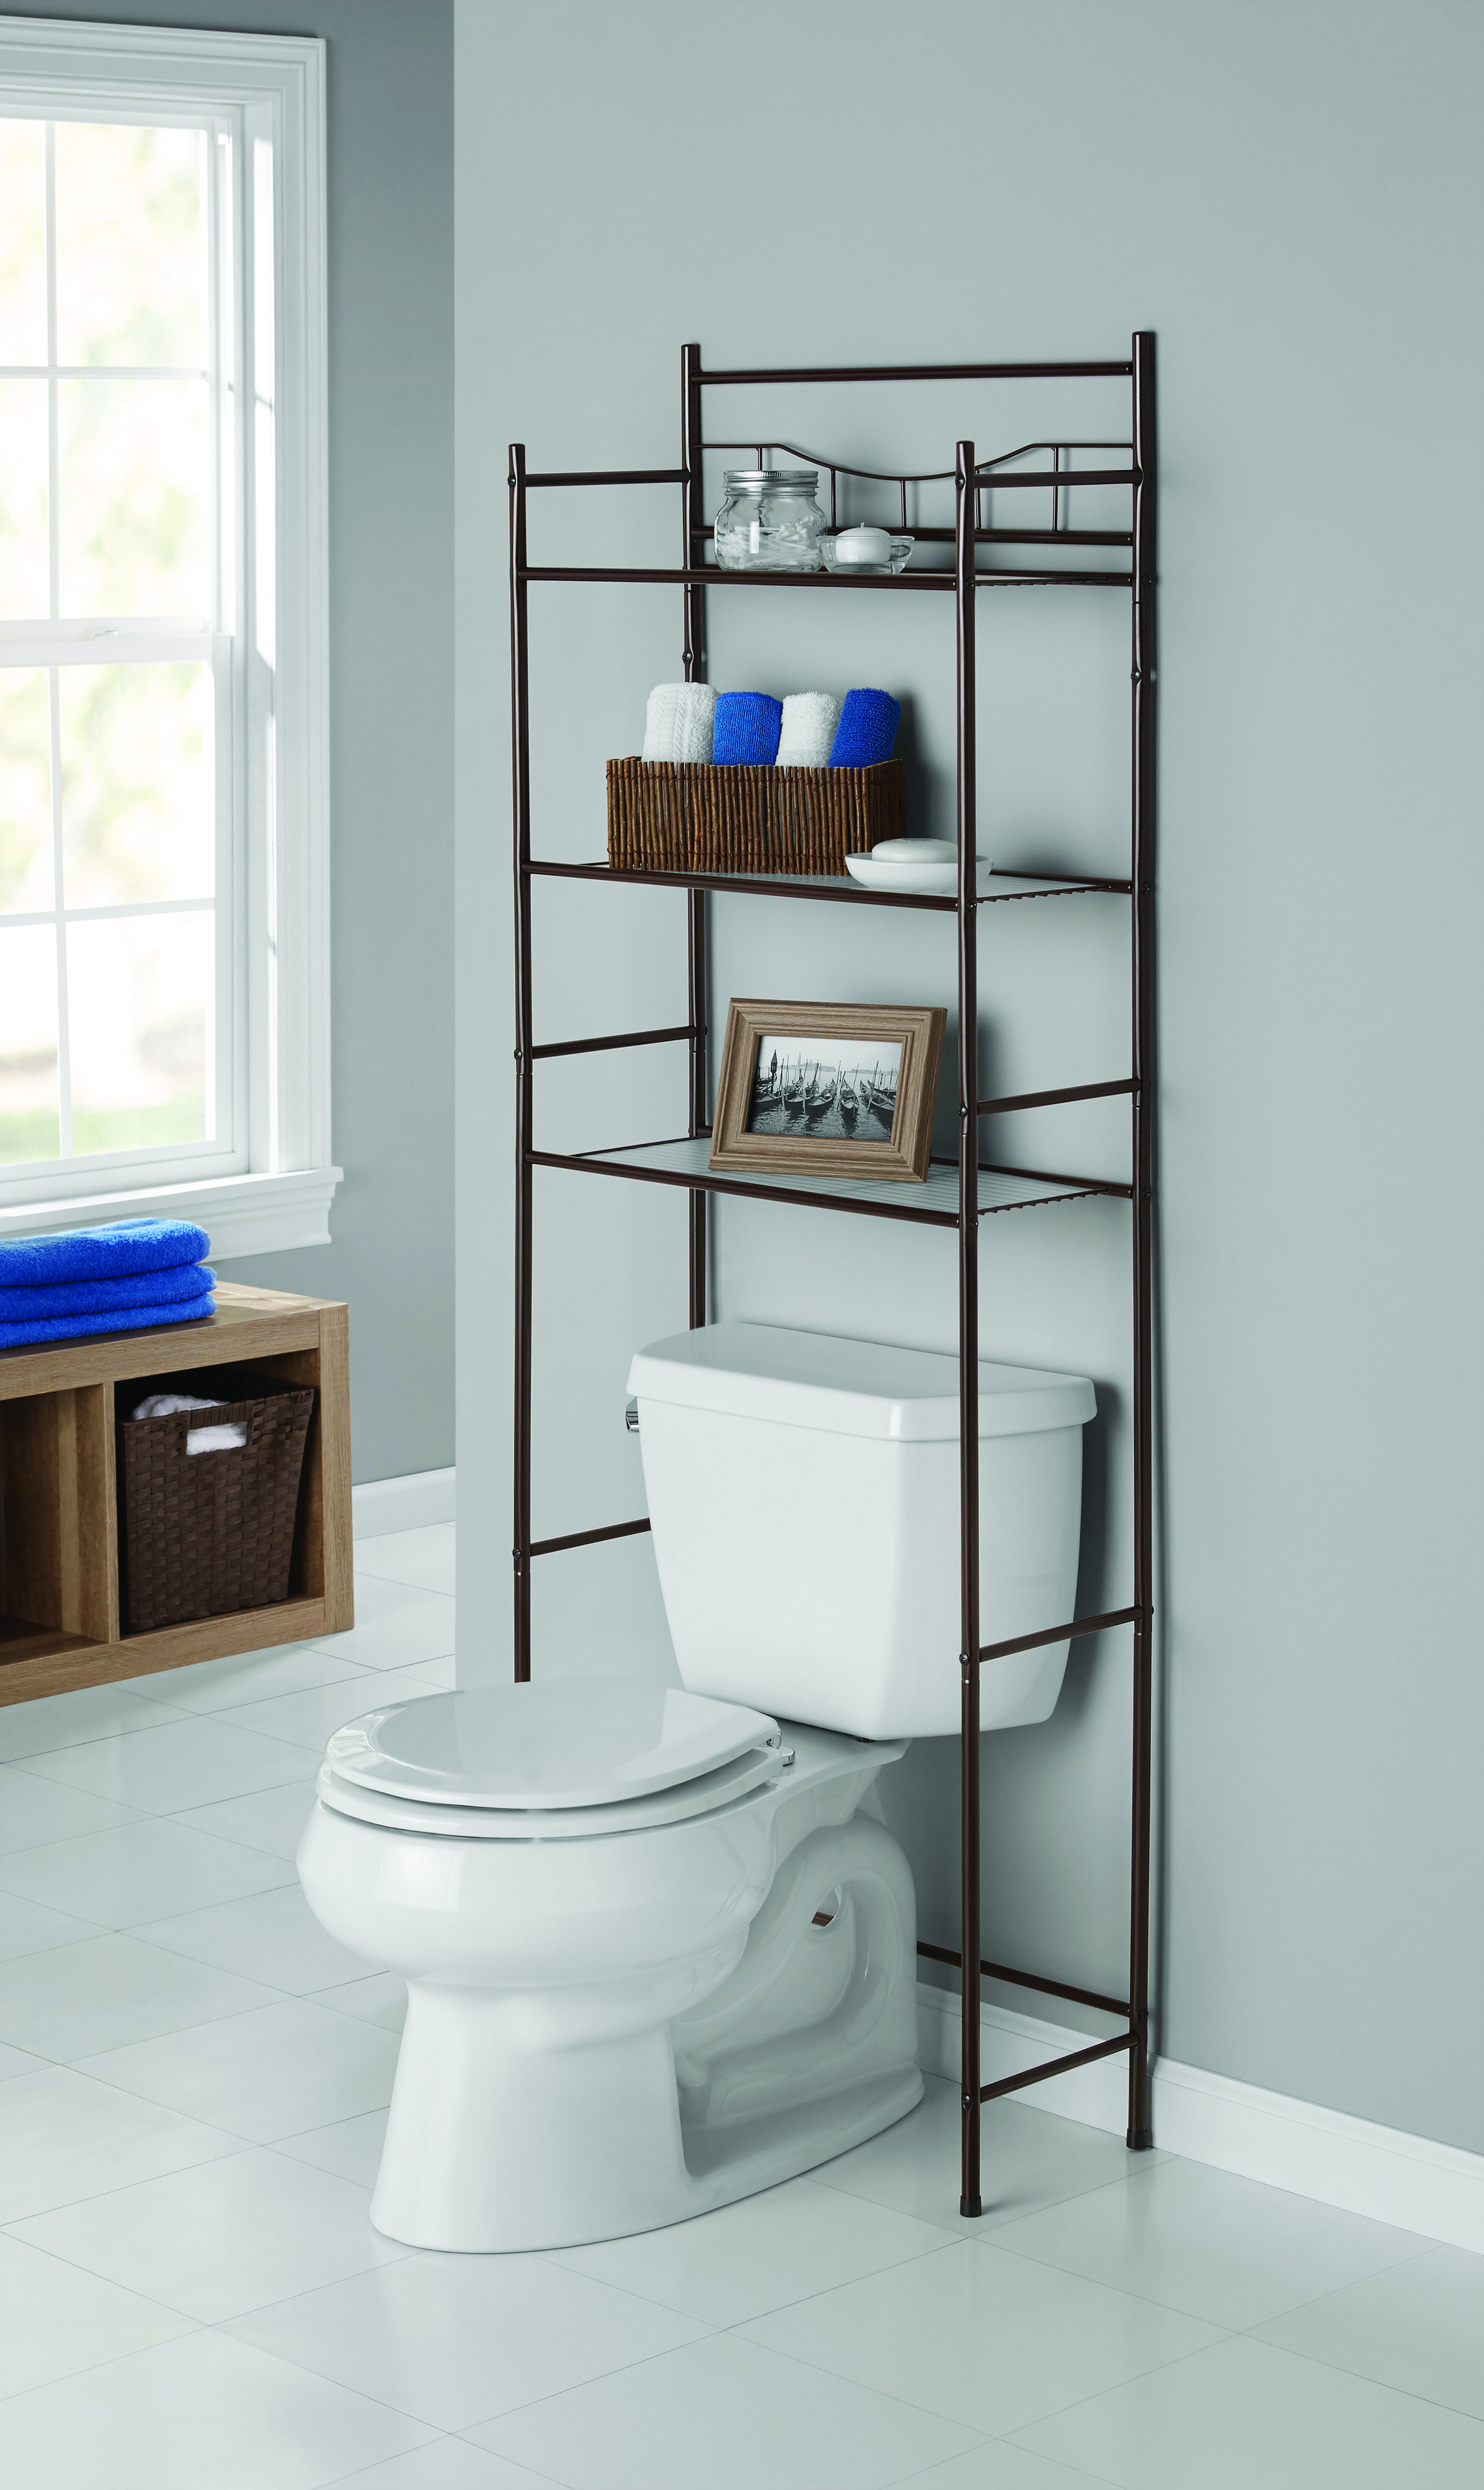 Mainstays 3-Shelf Bathroom over the Toilet Space Saver with Liner, Oil Rubbed Bronze for Adults - image 1 of 7